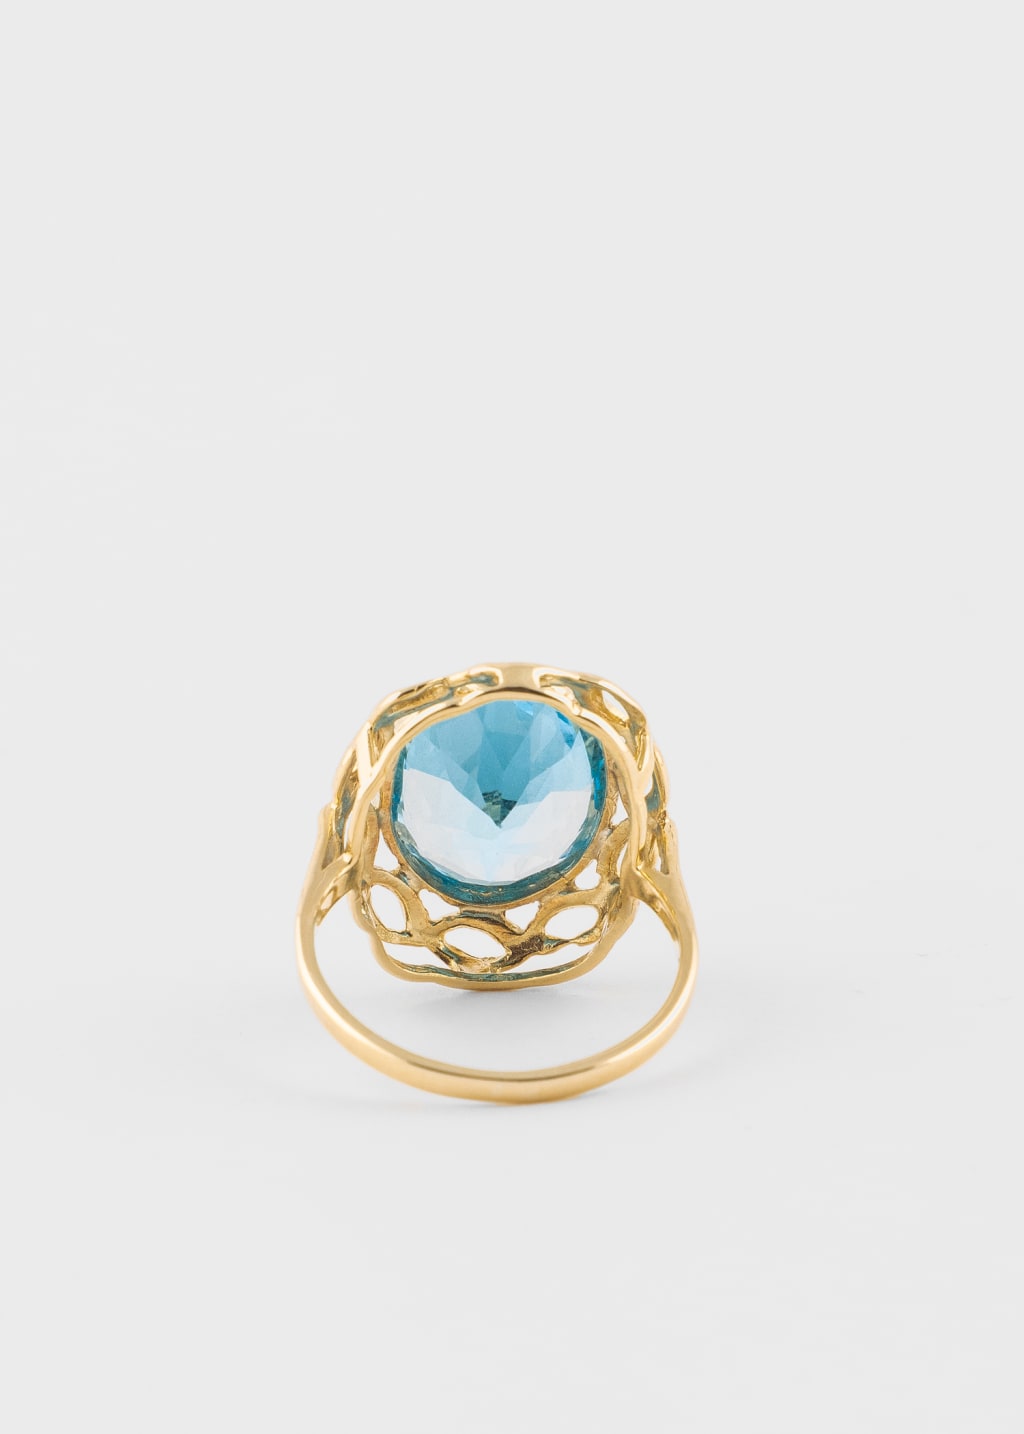 Product View - 'Enormous Sky Blue Topaz' Gold Cocktail Ring